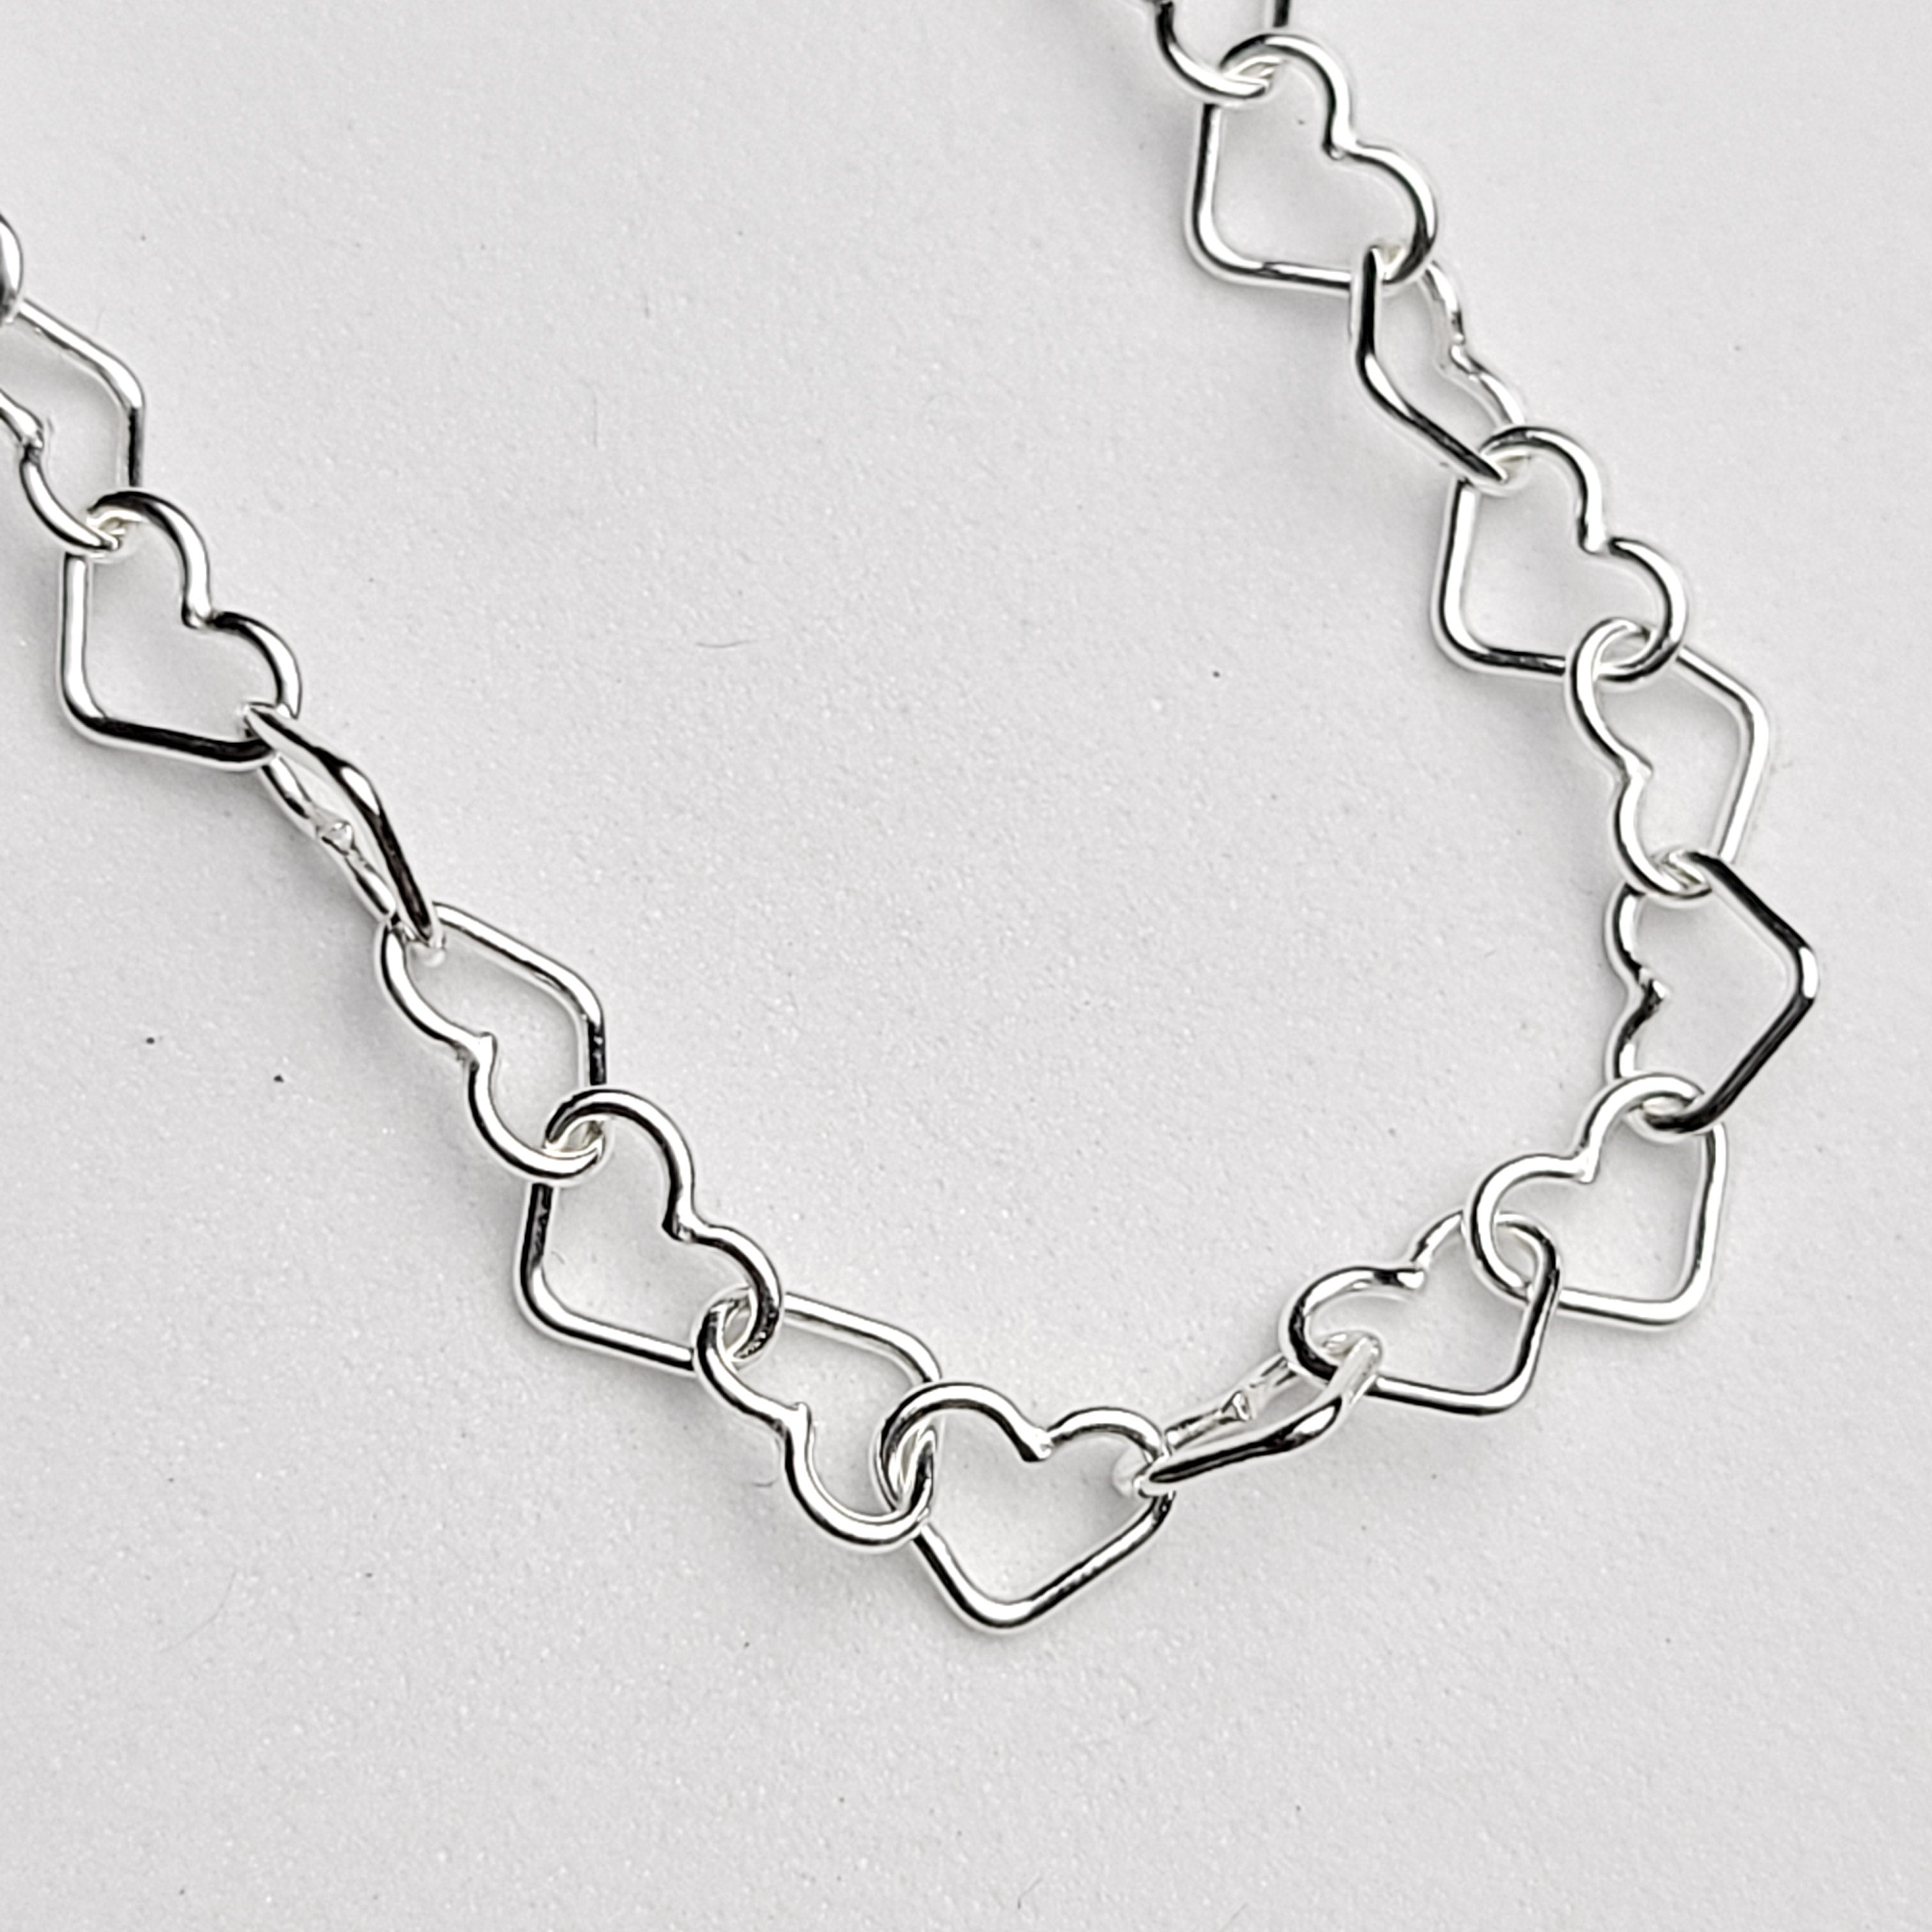 Tiny Heart Necklace Sterling Silver